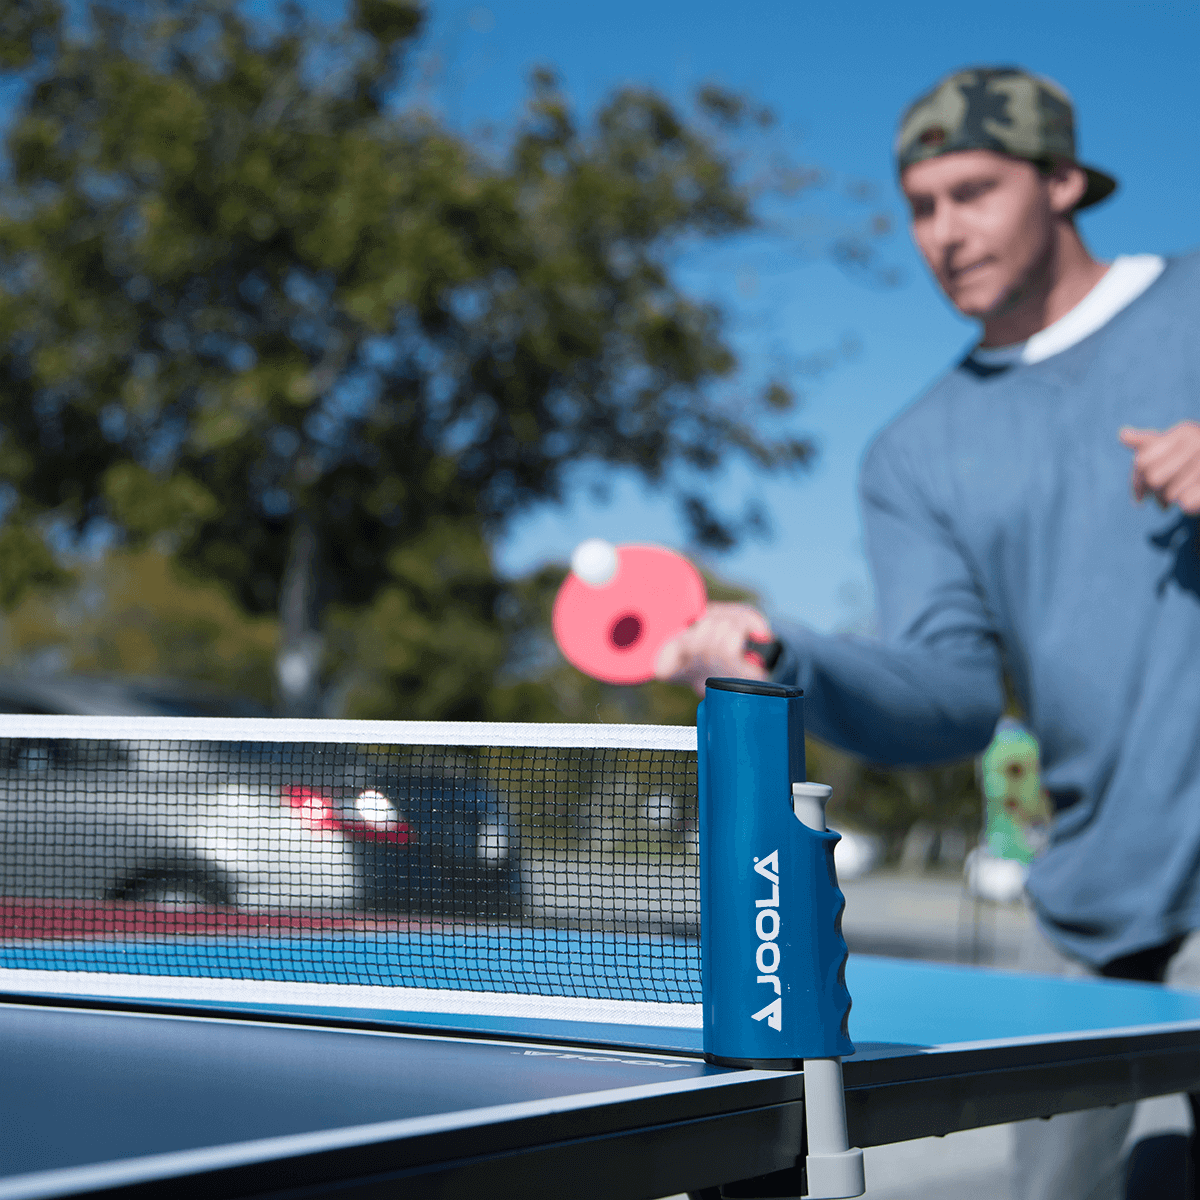 Image: Man playing table tennis in a parking lot outdoors using the Essentials Variant Set. The retractable net is attached to a light blue mini table tennis table.